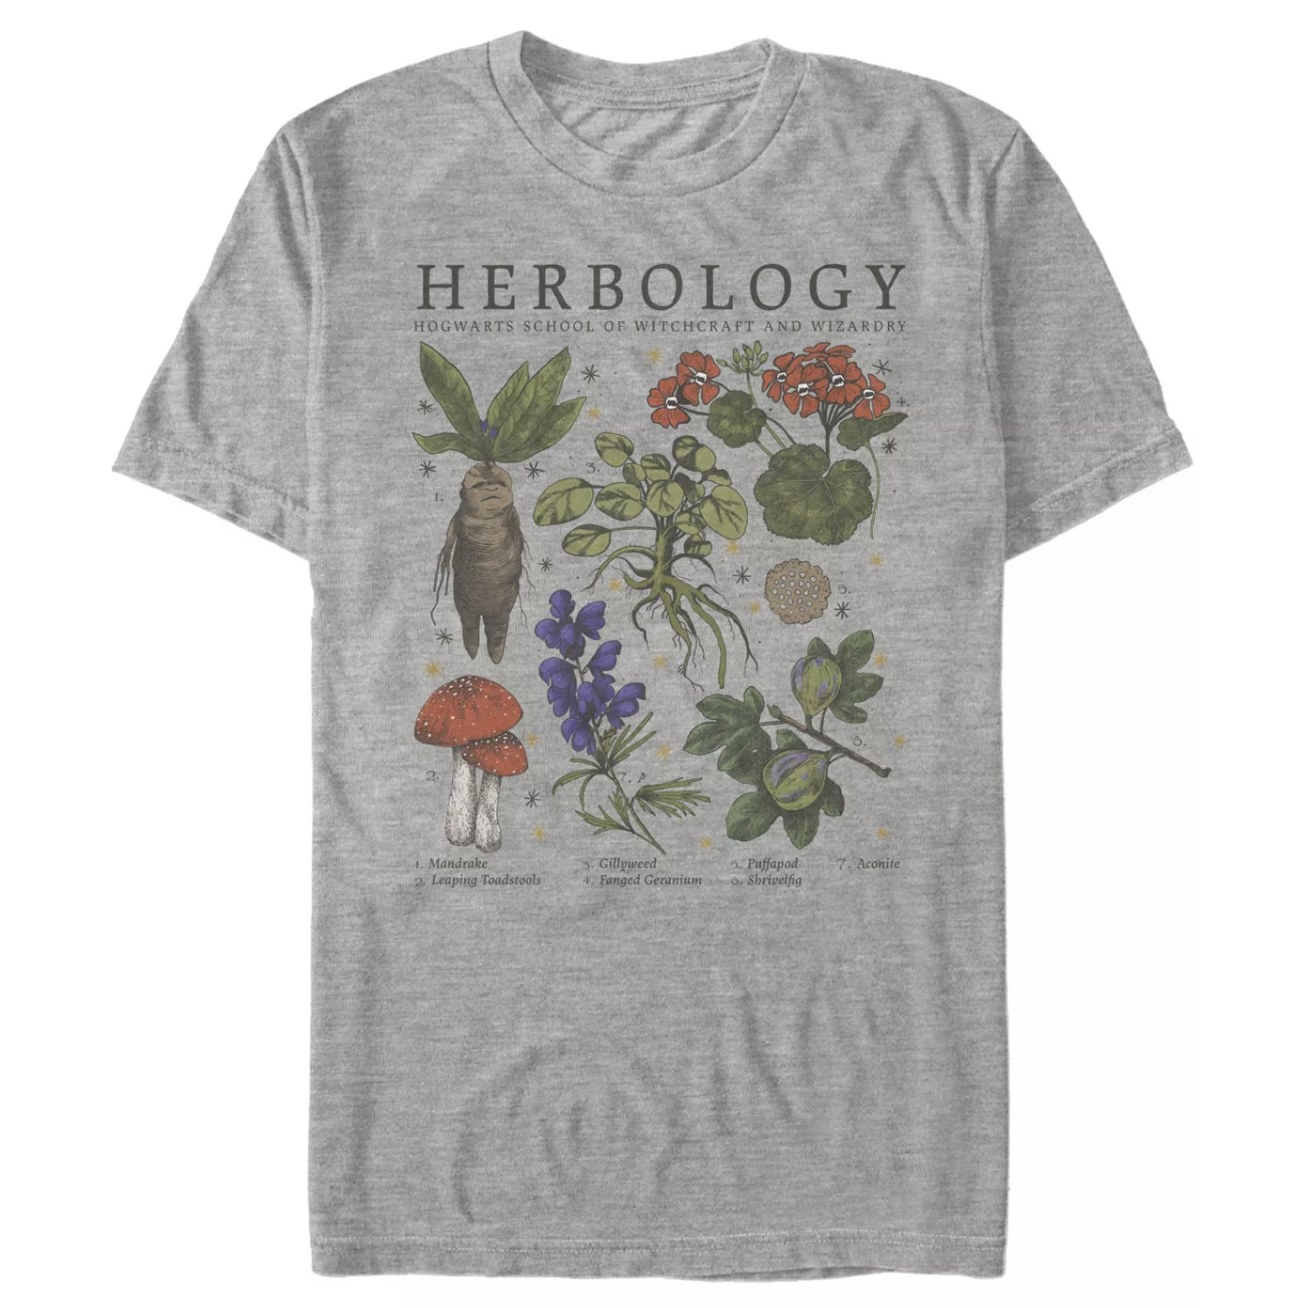 A grey t-shirt with herbs graphics on it